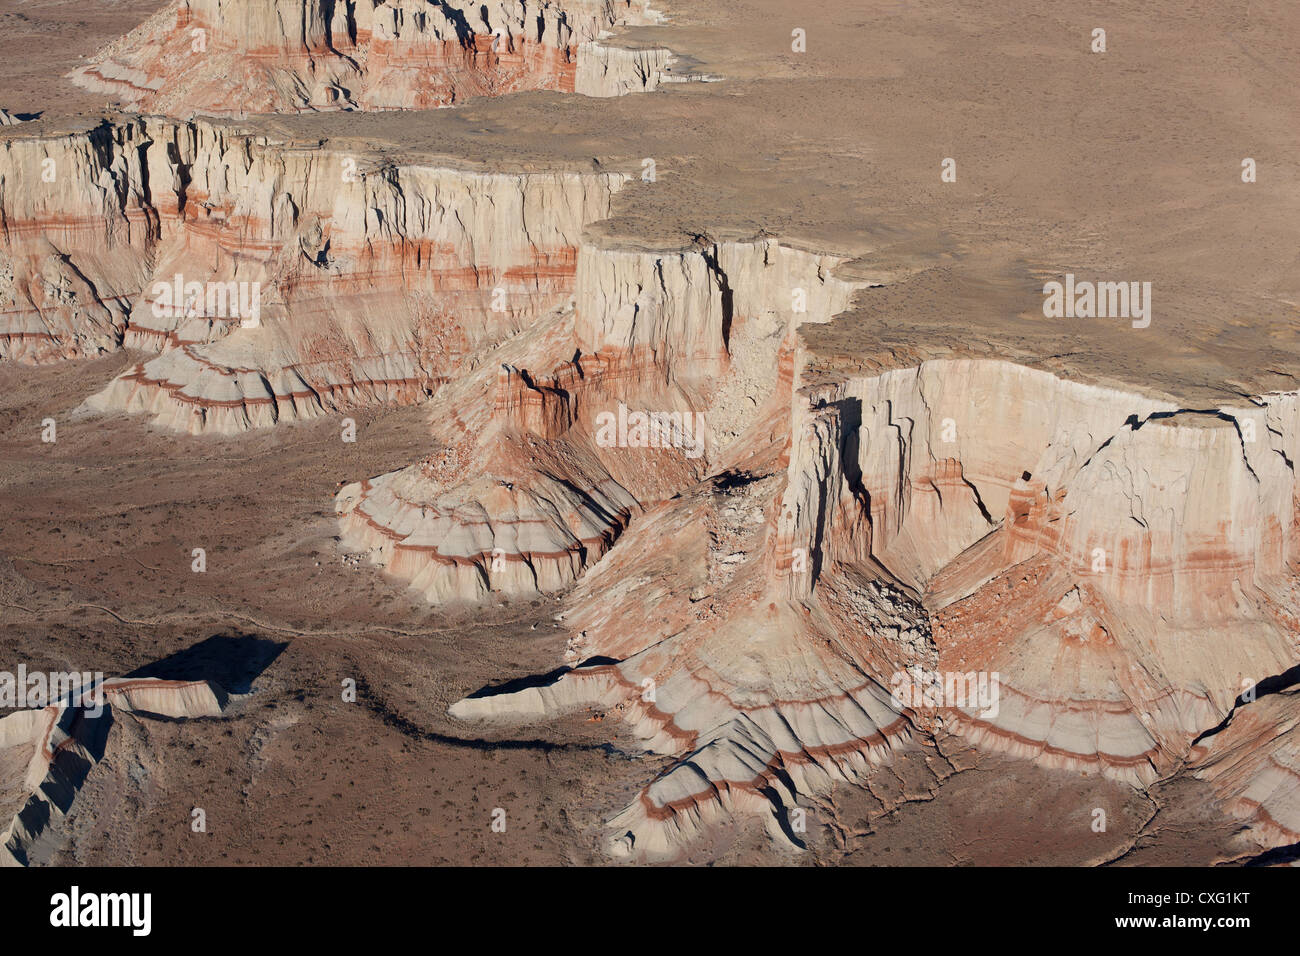 AERIAL VIEW. Towering cliffs carved in the Moenkopi Plateau. Coal Mine Canyon, Navajo and Hopi Lands, Coconino County, Arizona, USA. Stock Photo